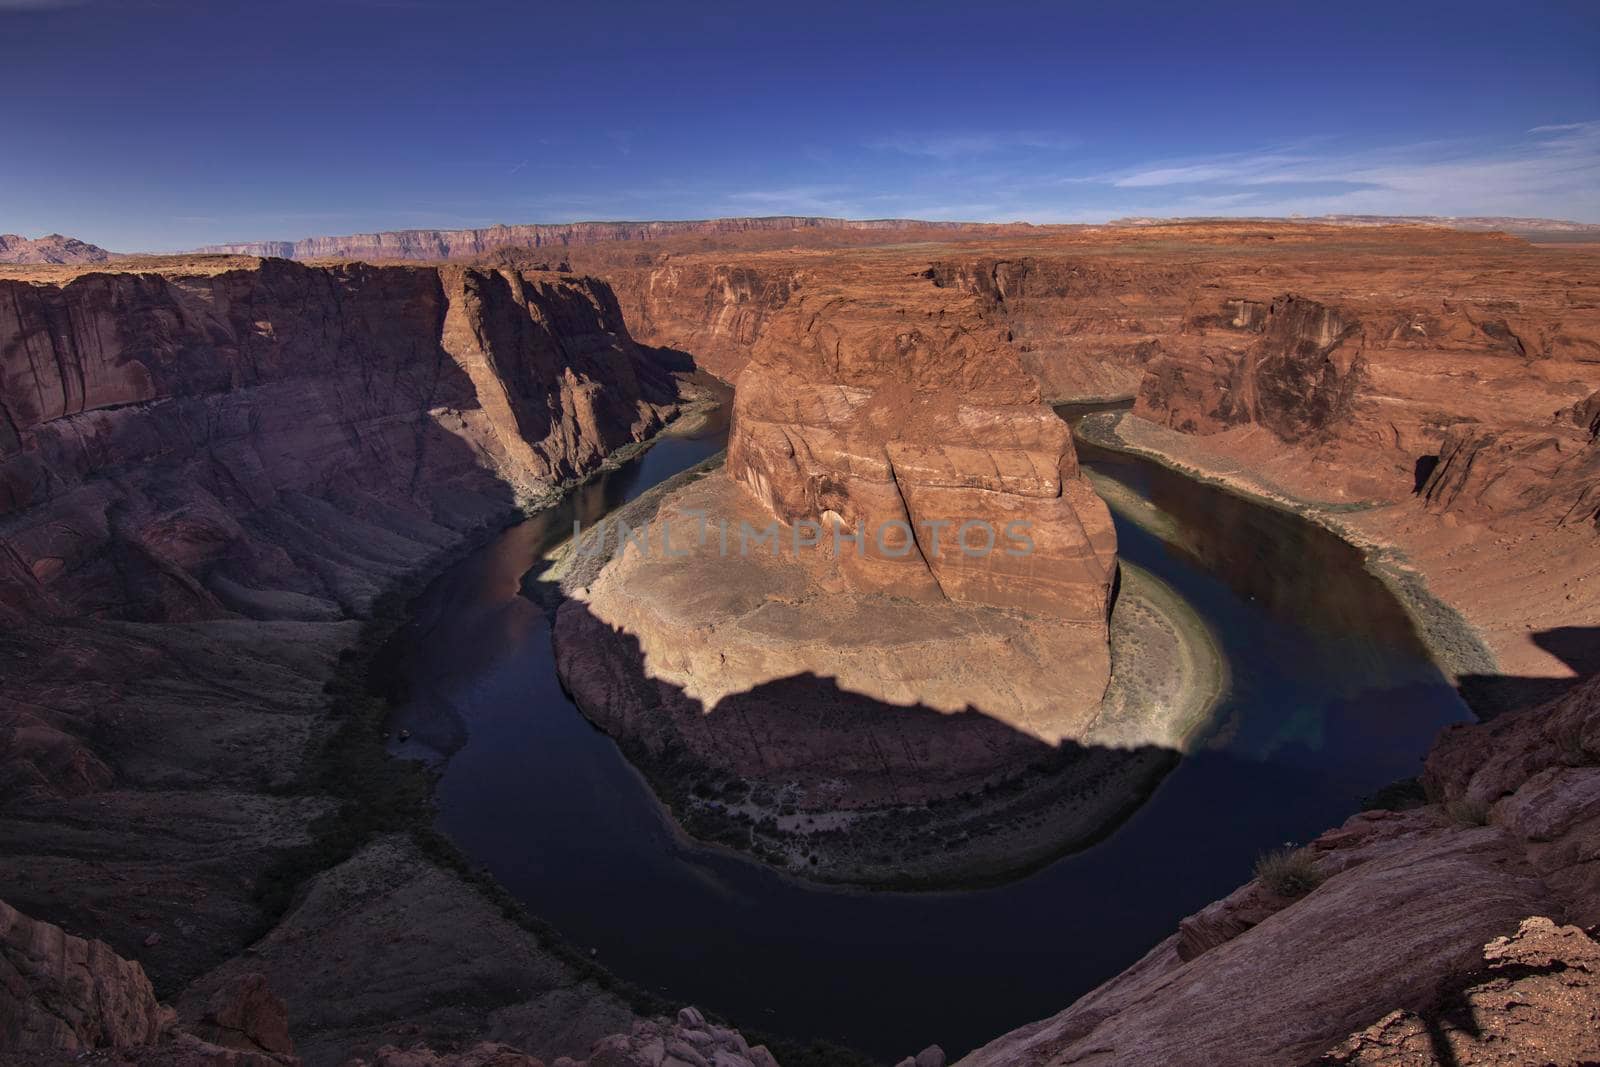 Landscape showing famous place Horseshoe Bend in Arizona in the USA